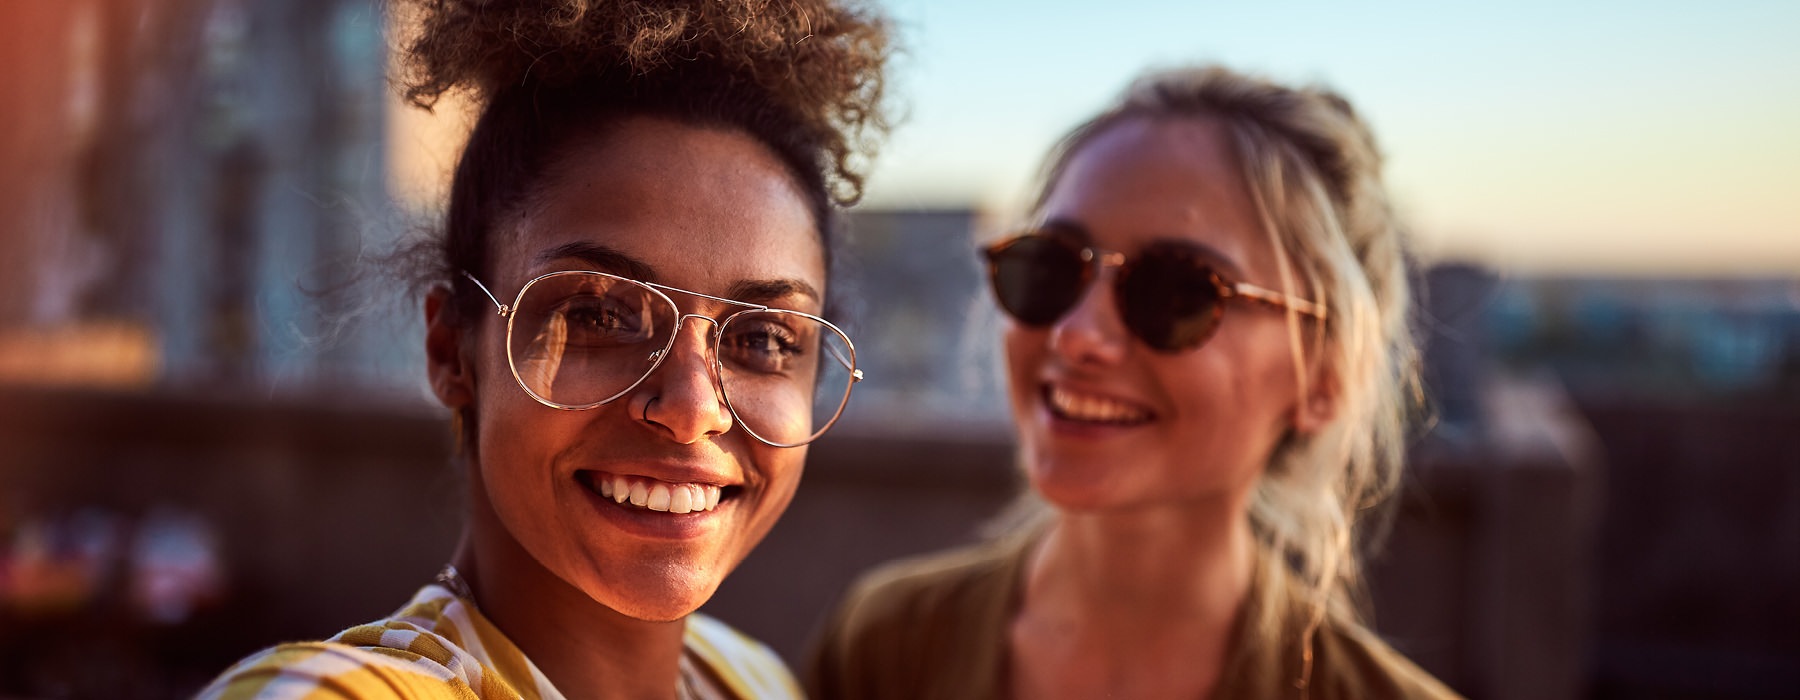 two women with sunglasses smile on building's rooftop